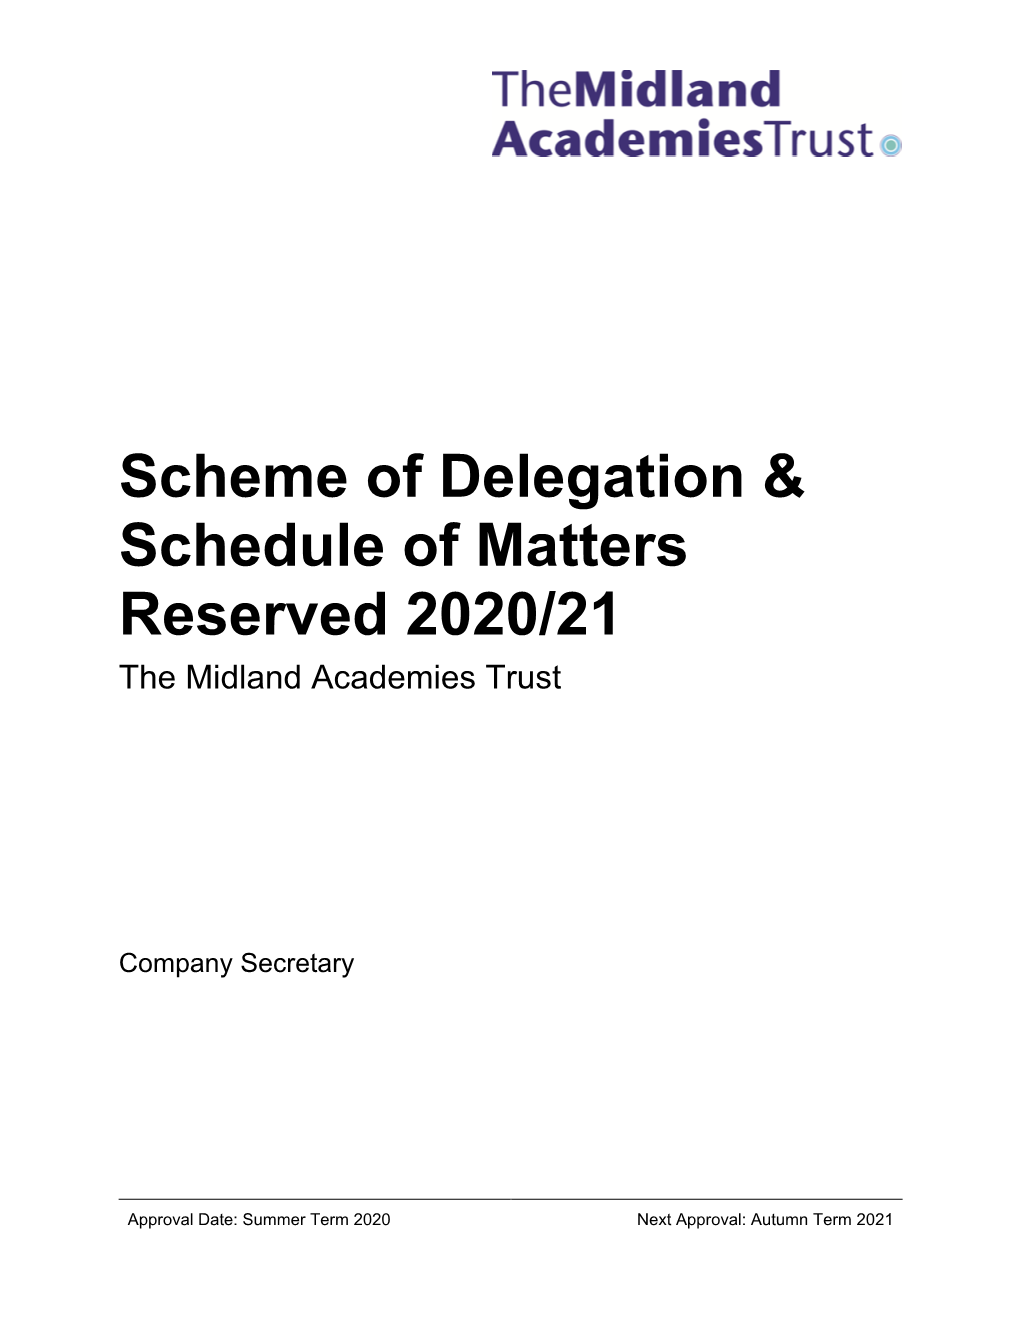 Scheme of Delegation & Schedule of Matters Reserved 2020/21